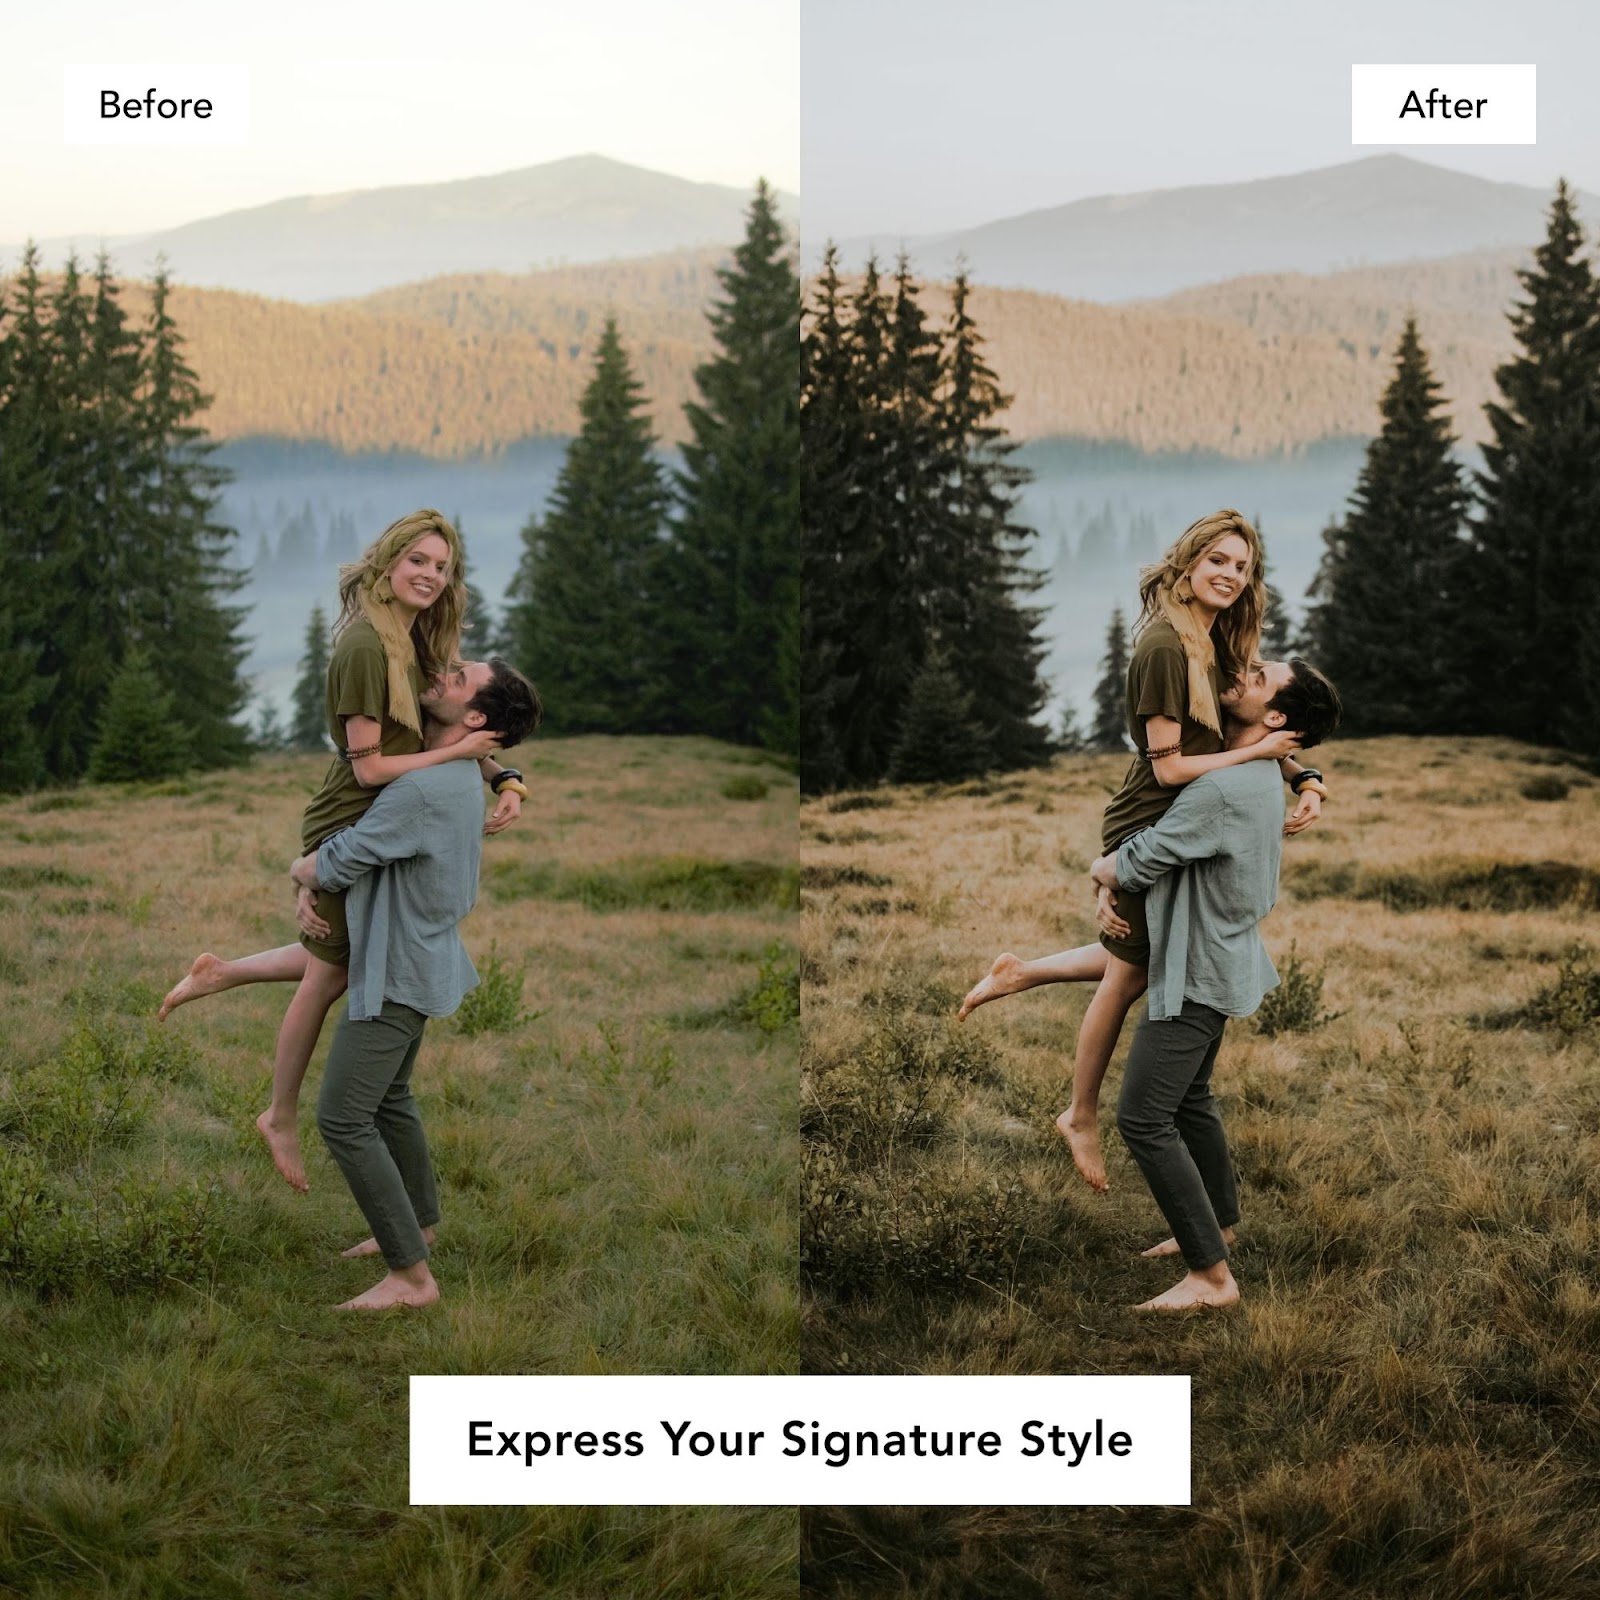 moody flourish presets cover grid before after